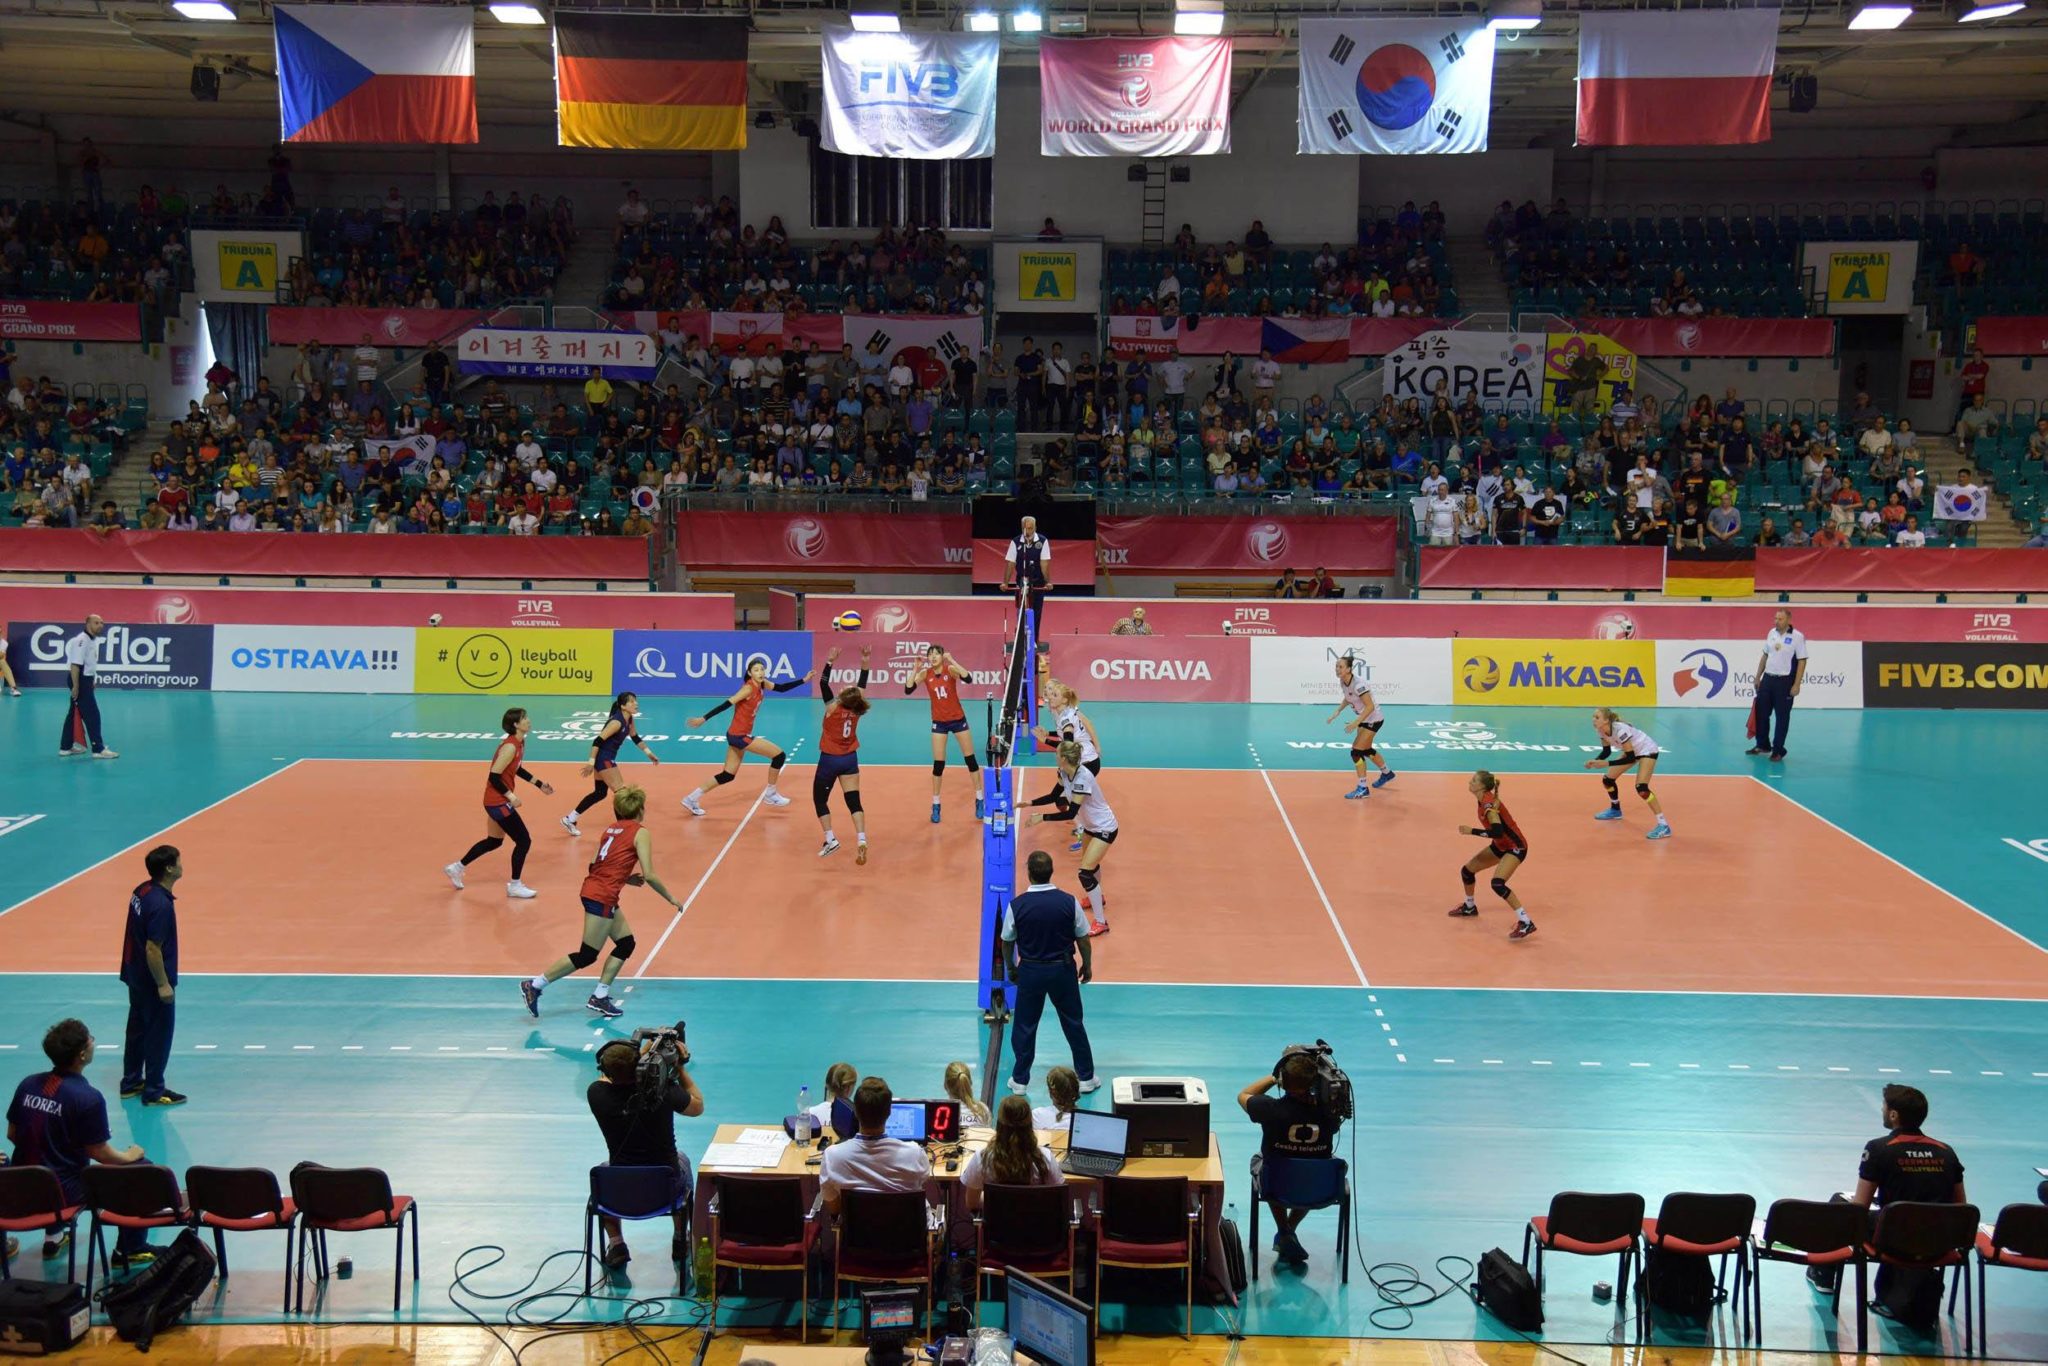 WATCH LIVE Korea Meets Poland for World Grand Prix Group 2 Title